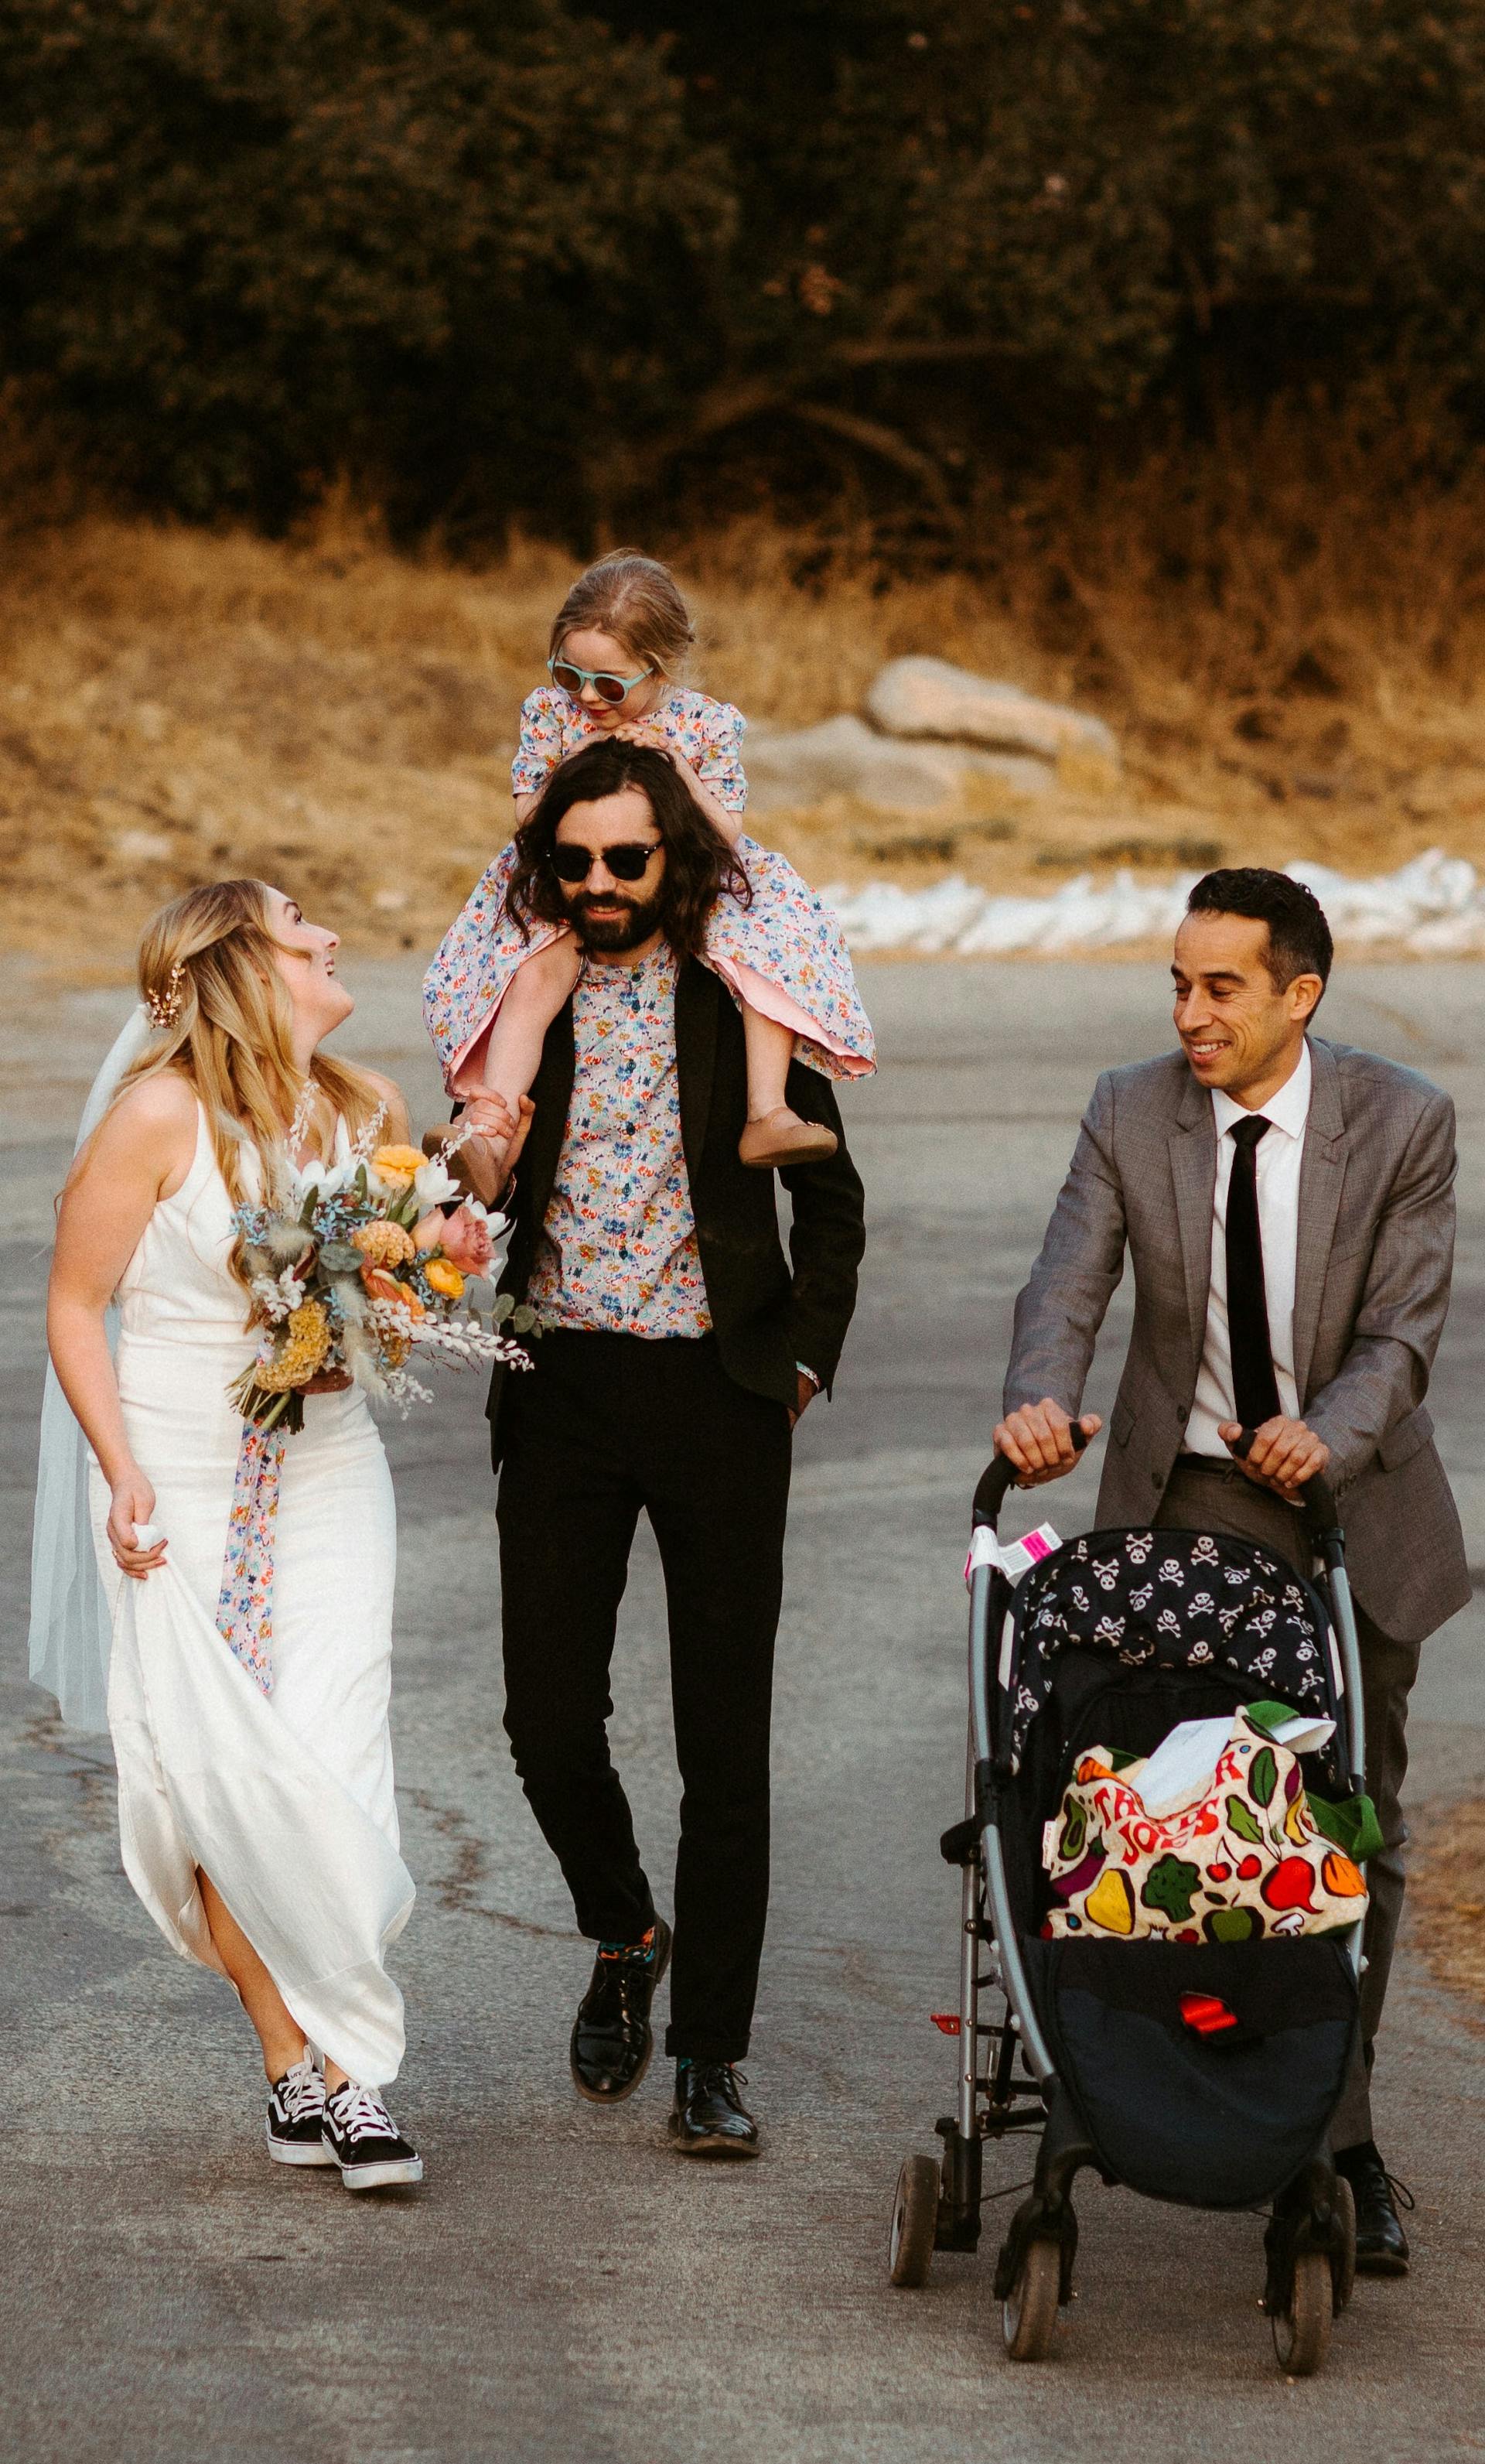 a photo of jacob pushing a stroller up a hill as the couple walk next to him.  There is a little girl sitting on the shoulder of the groom